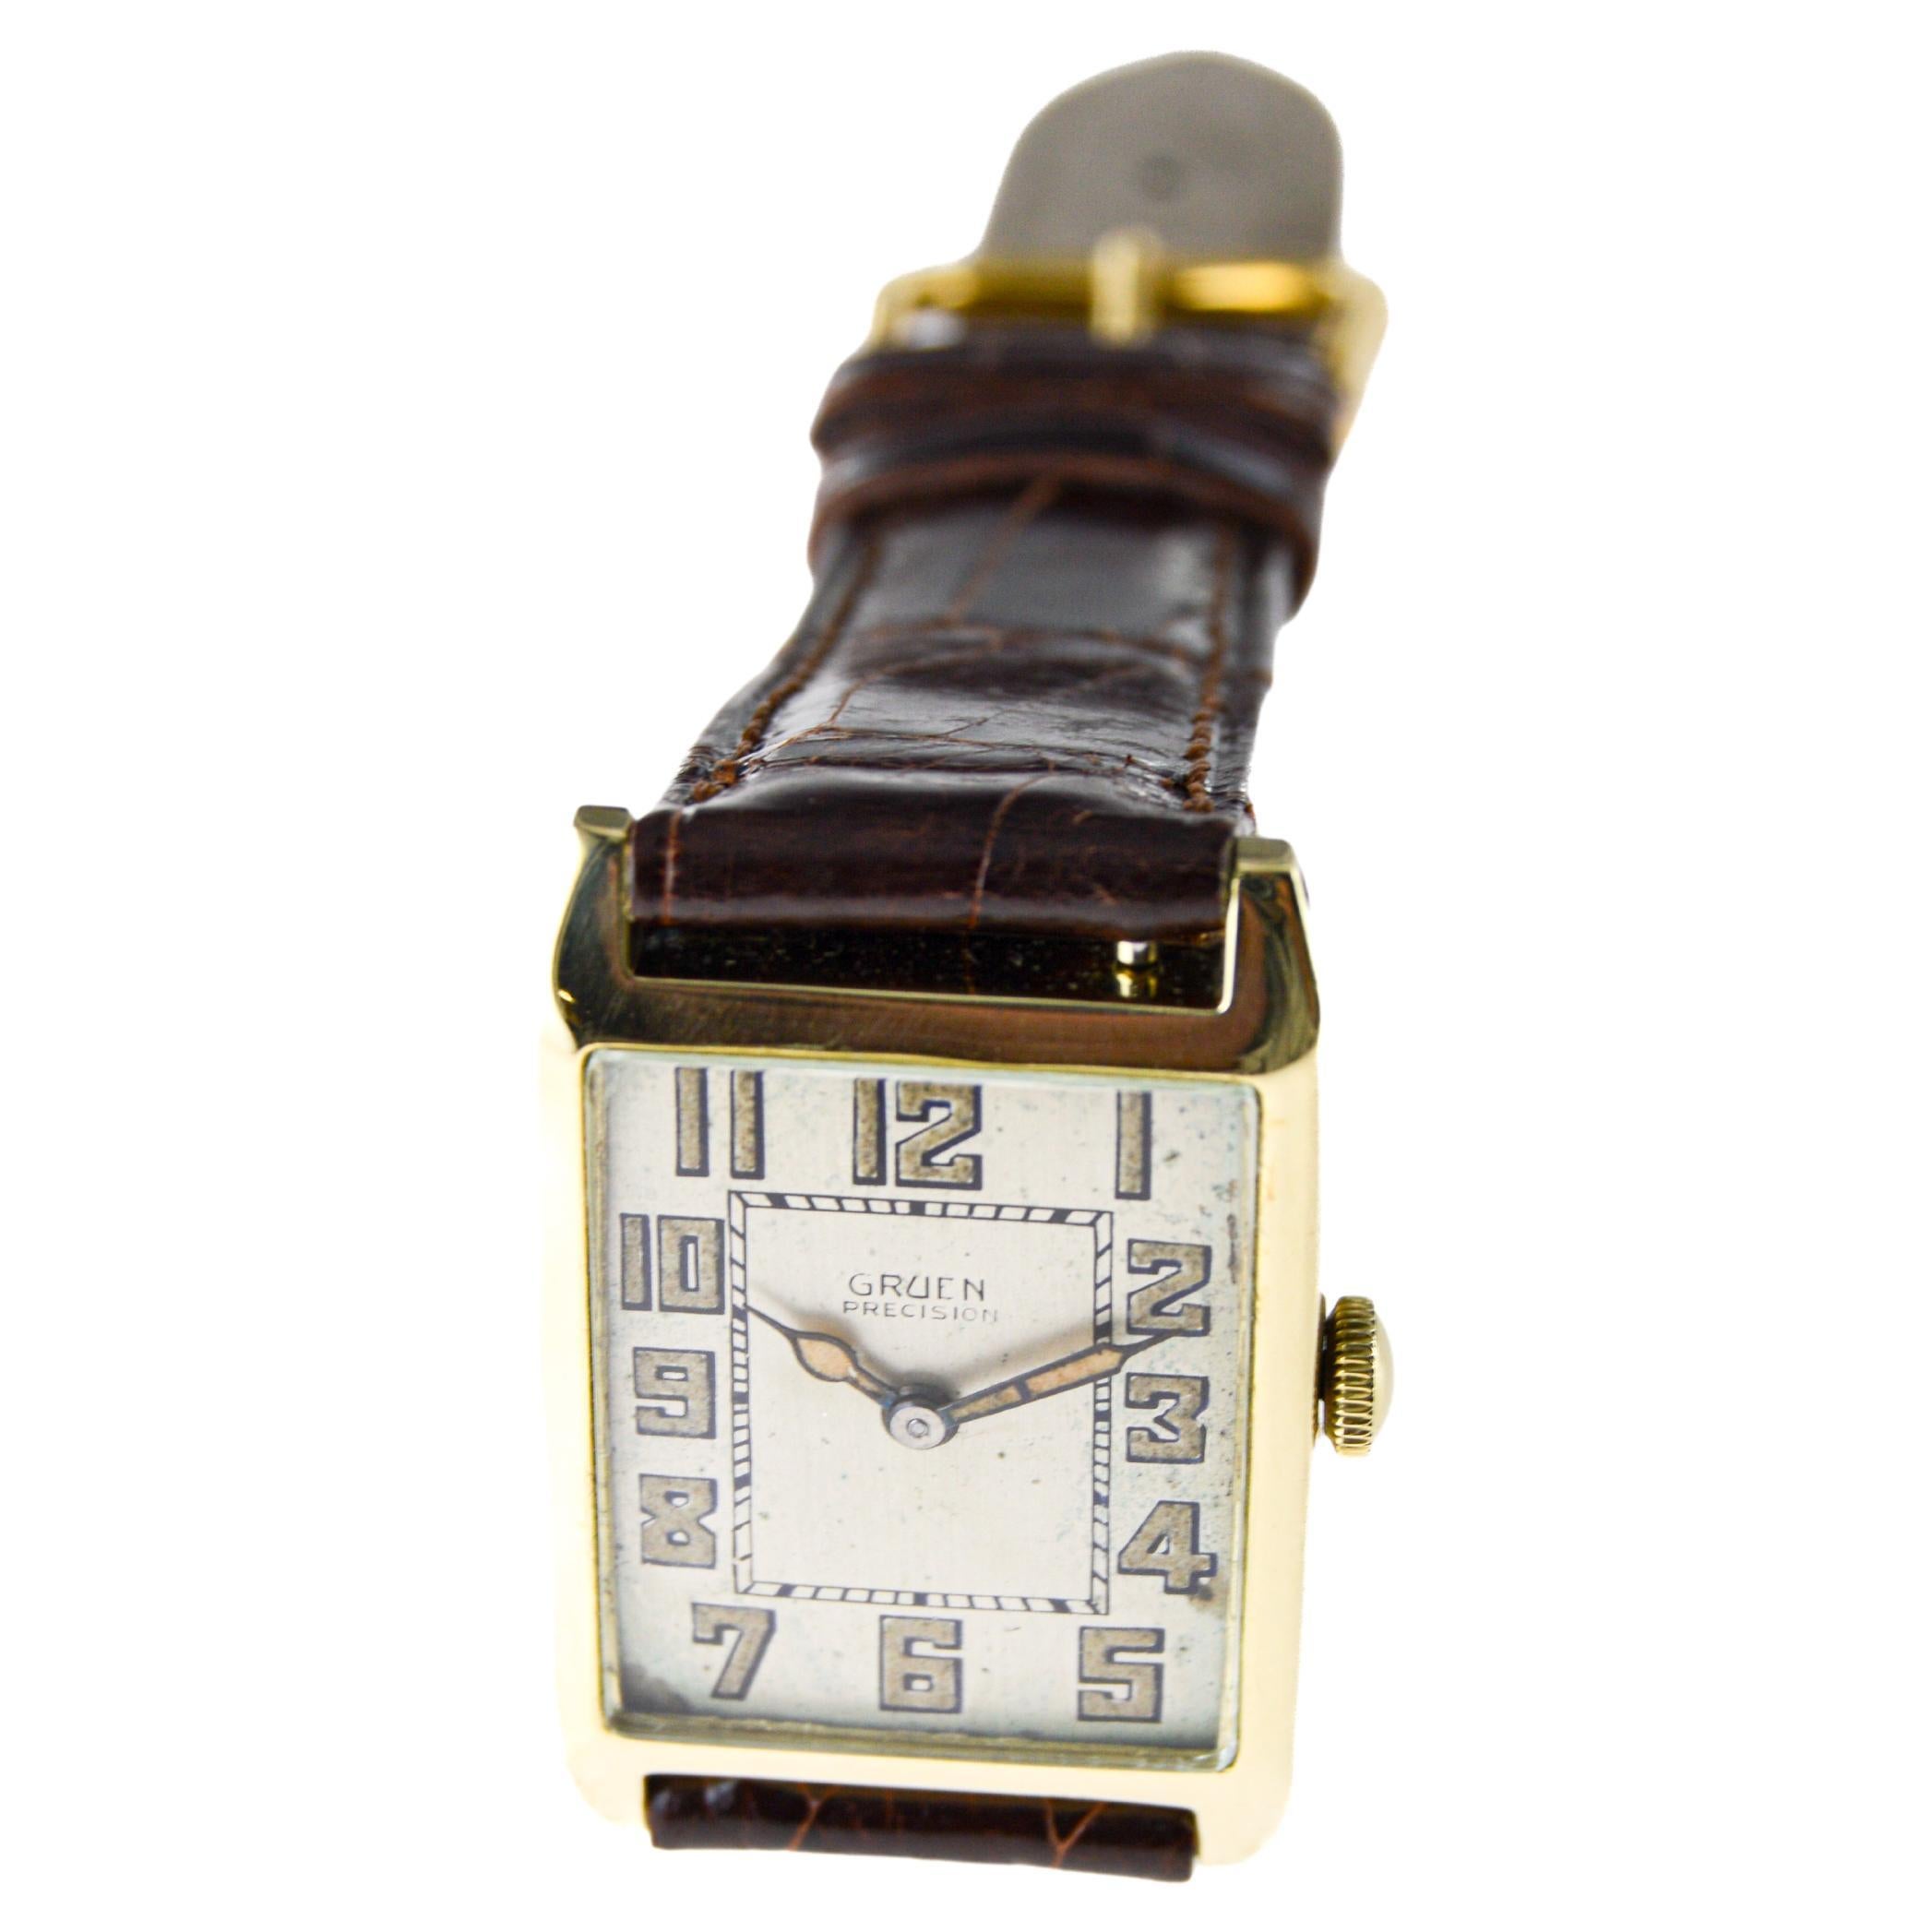 Gruen Rare 14Kt Art Deco Tank Style Watch with Original Dial from 1930  For Sale 2